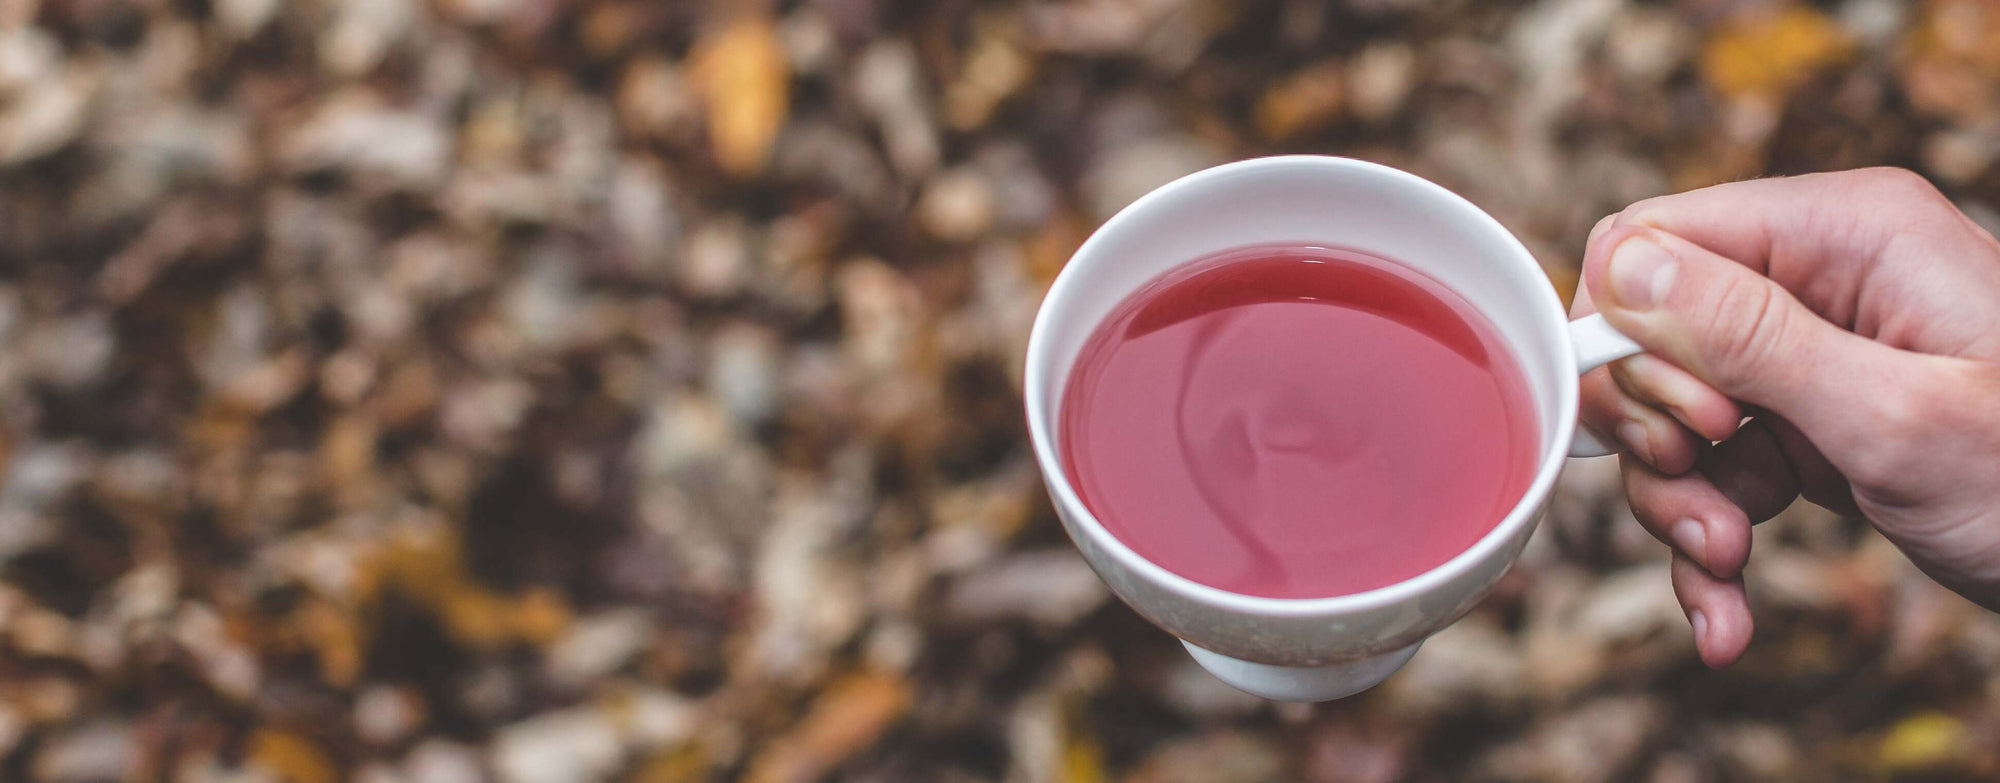 A cup of hibiscus tea being held outdoors in and autumn backdrop.